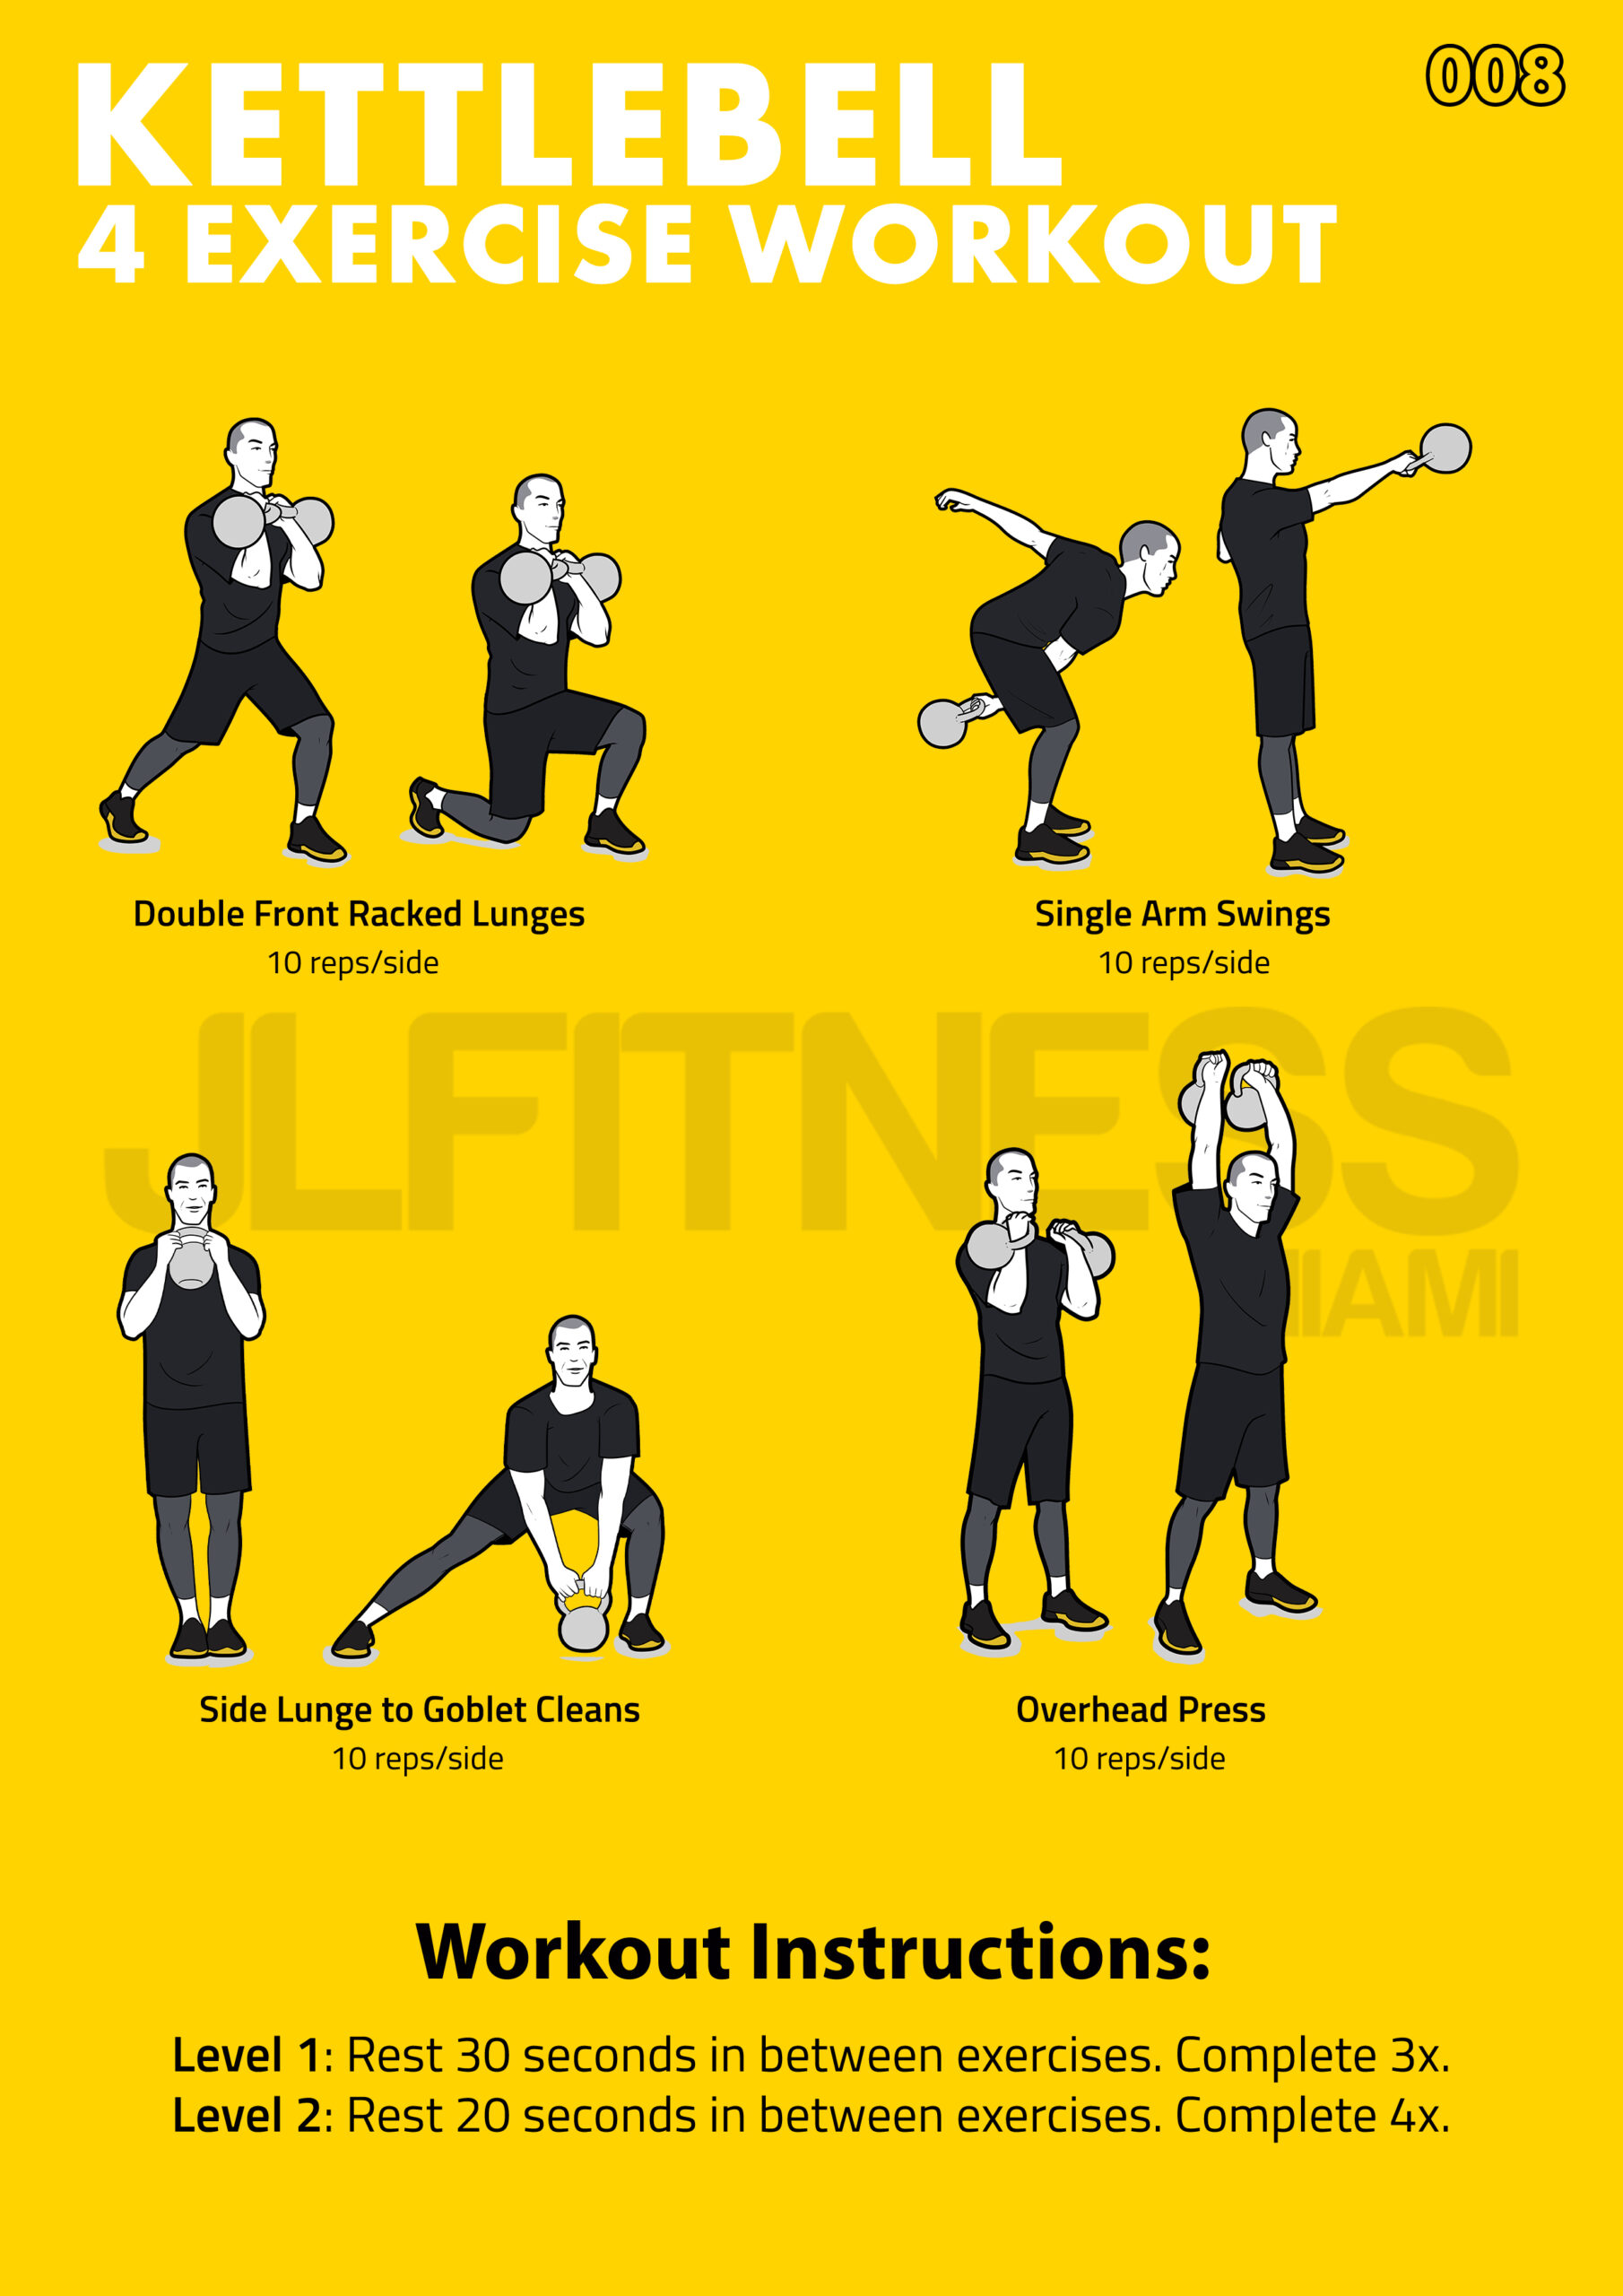 kettlebell workout with 4 exercises